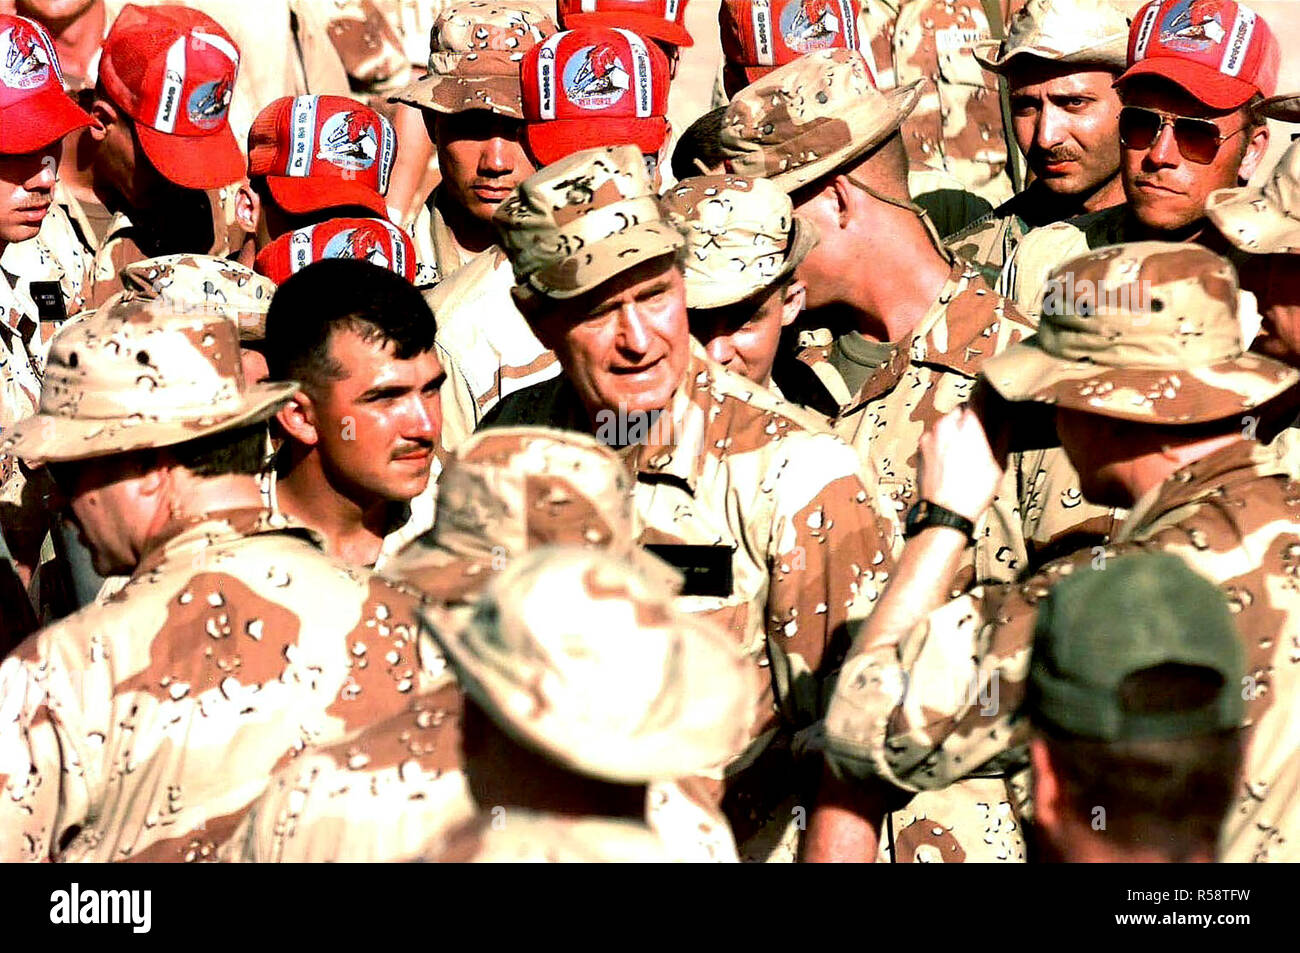 1993 - US President George Bush is centered in the frame, facing the camera and surrounded by several members of the US Forces assigned to the mission in Somalia.  Those wearing red hats belong to the Air Force RedHorse team from Hurlburt Field, Florida.  The President visited Somalia to show is gratitude to those involved in the mission of Operation Restore Hope. Stock Photo